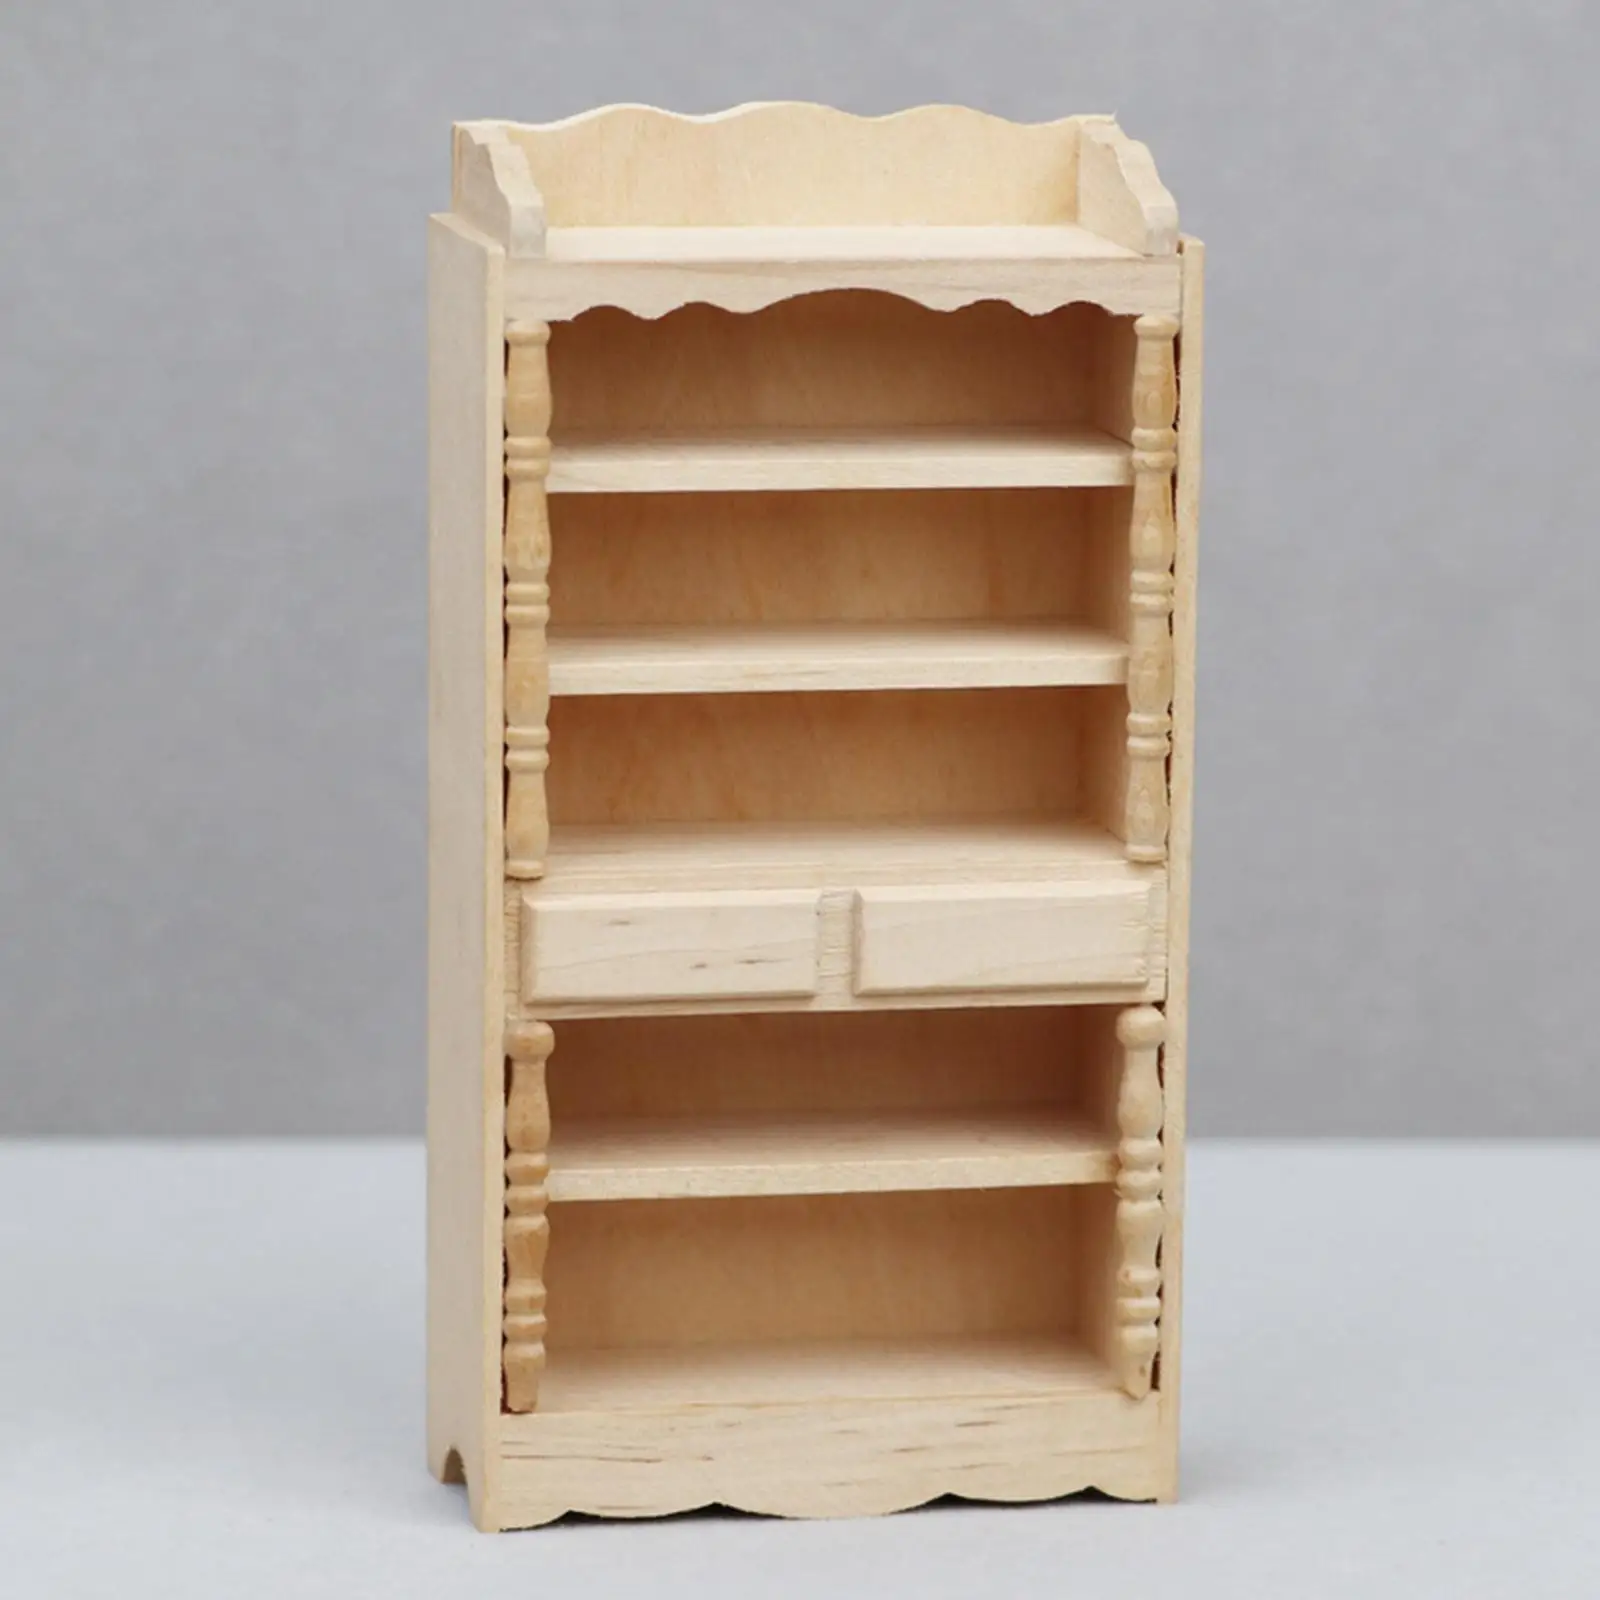 Dollhouse Wood Cabinet Dollhouse Decoration 1:12 Scale Miniature Cupboard for